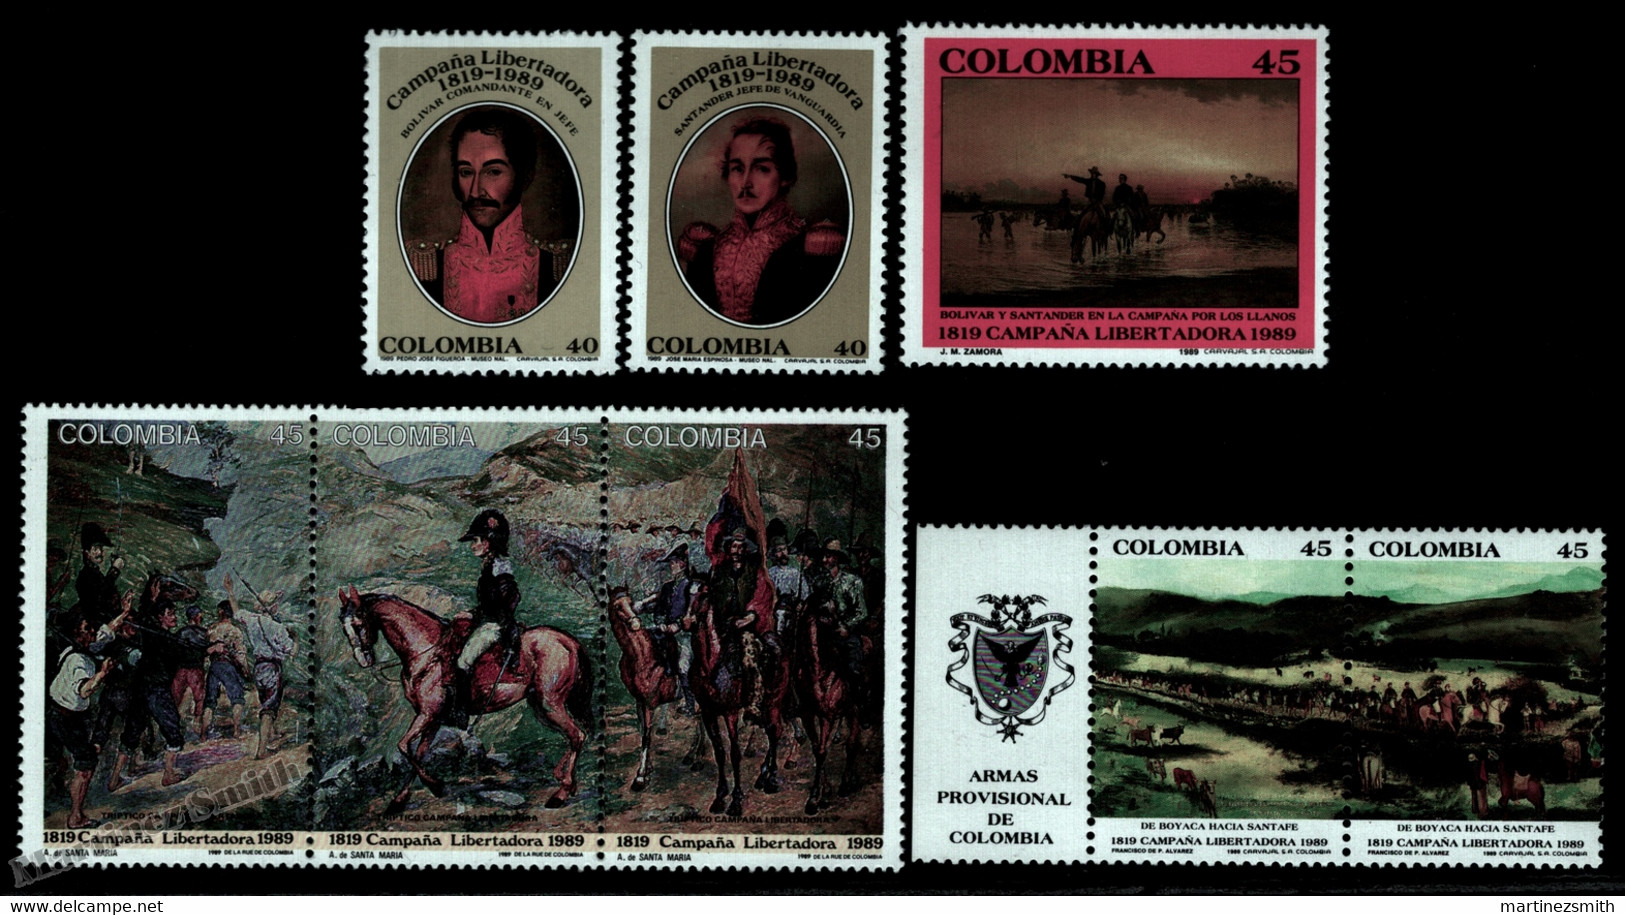 Colombie Colombia 1989 Yvert 934-41, Liberty Campaign, Bolivar - MNH - Colombia